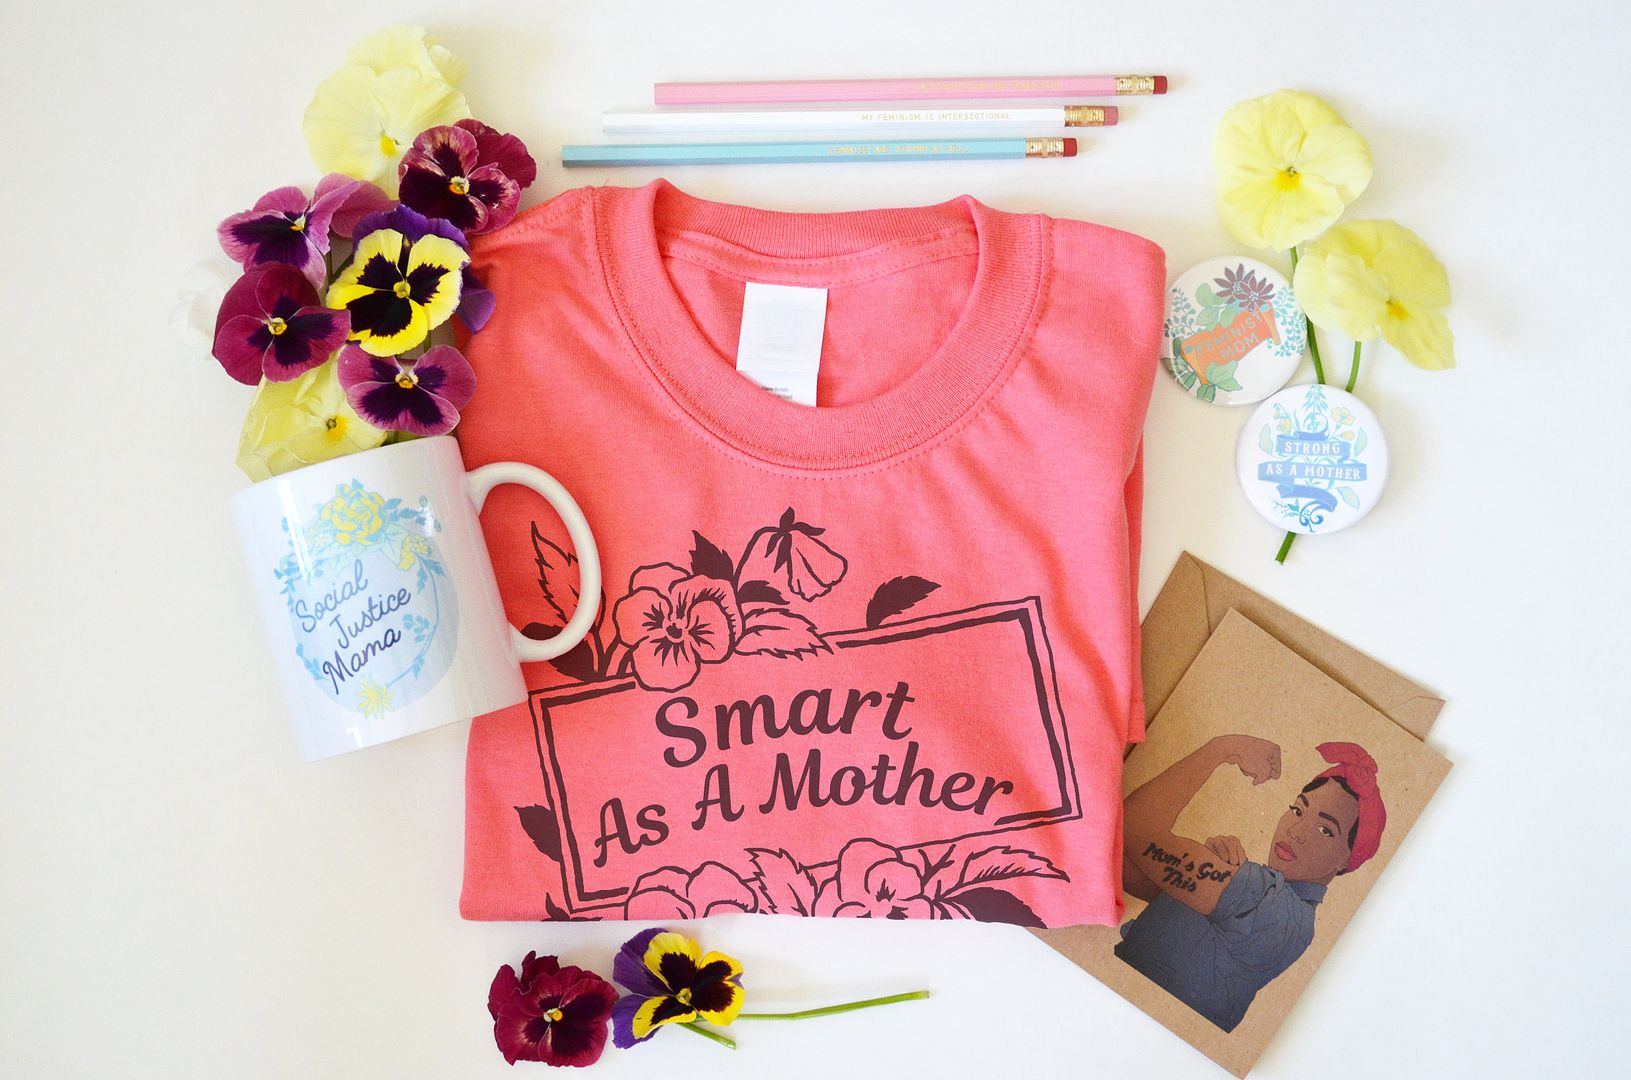 Feminist Mother's Day gifts: Feminist Mother's Day Gift Bundle from Fabulously Feminist 